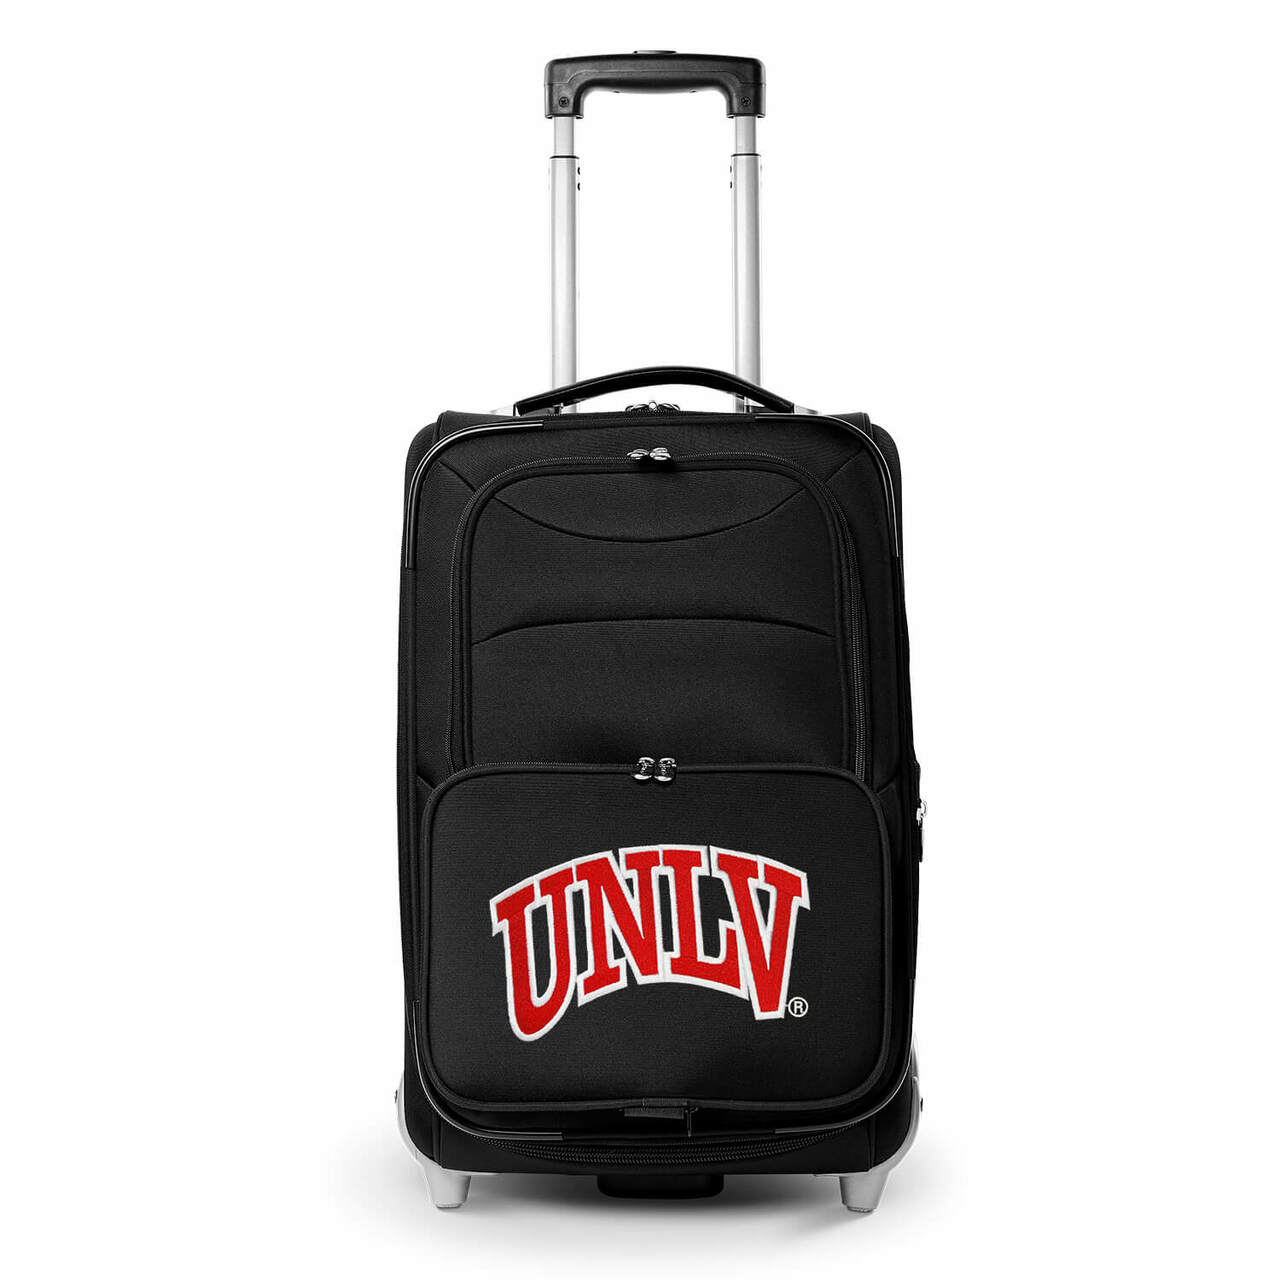 Rebels Carry On Luggage | UNLV Rebels Rolling Carry On Luggage